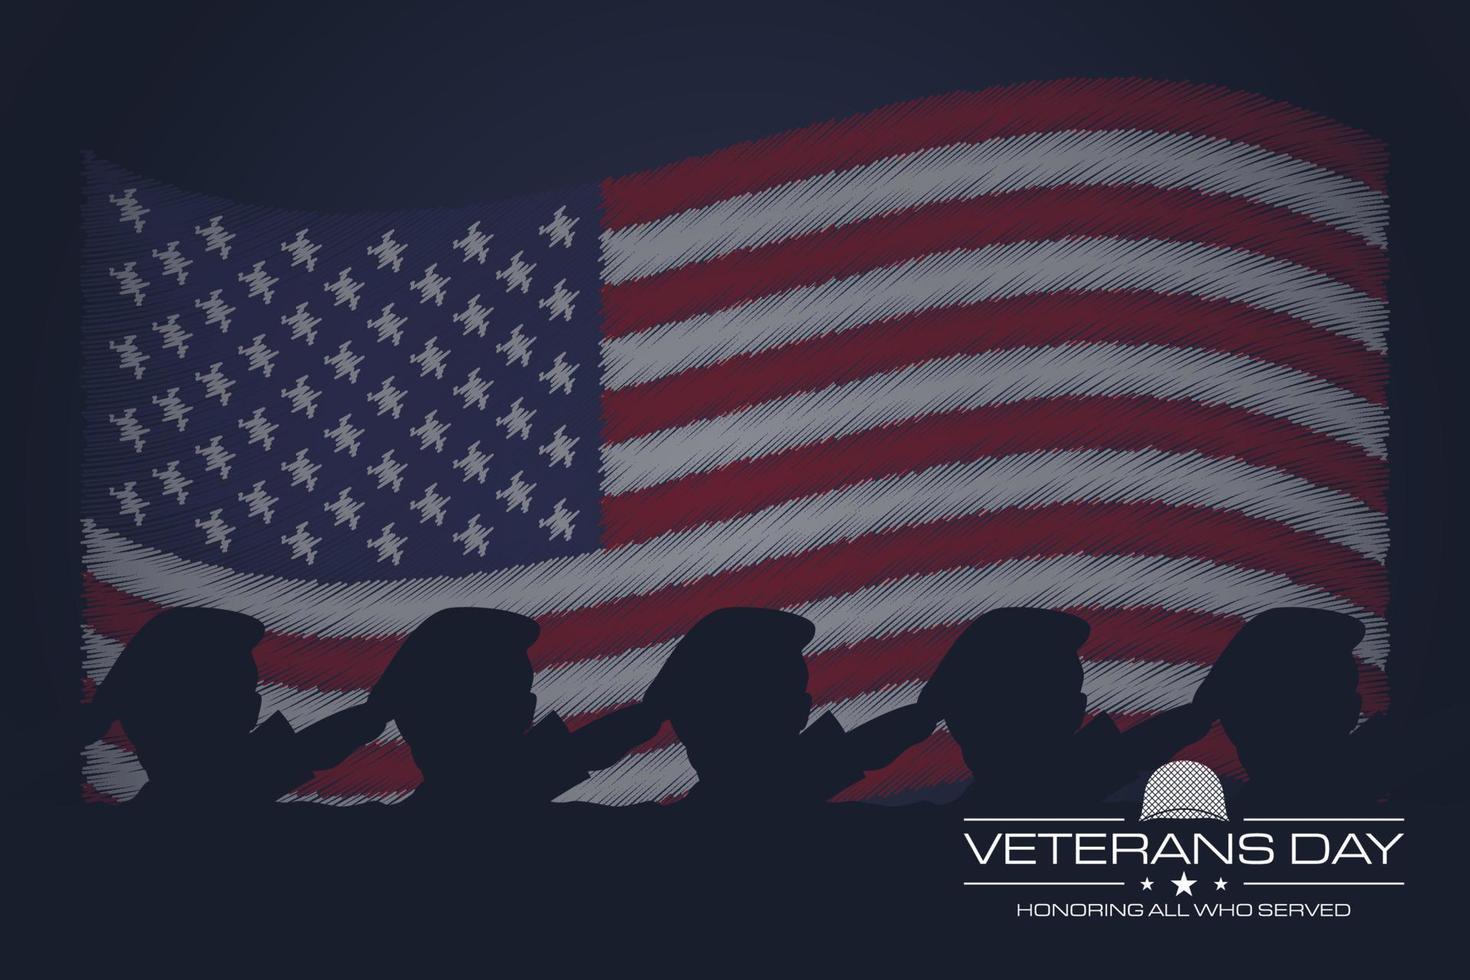 Vector image background for veterans day celebrations with the American flag and copy space area. Suitable to place on content with that theme.